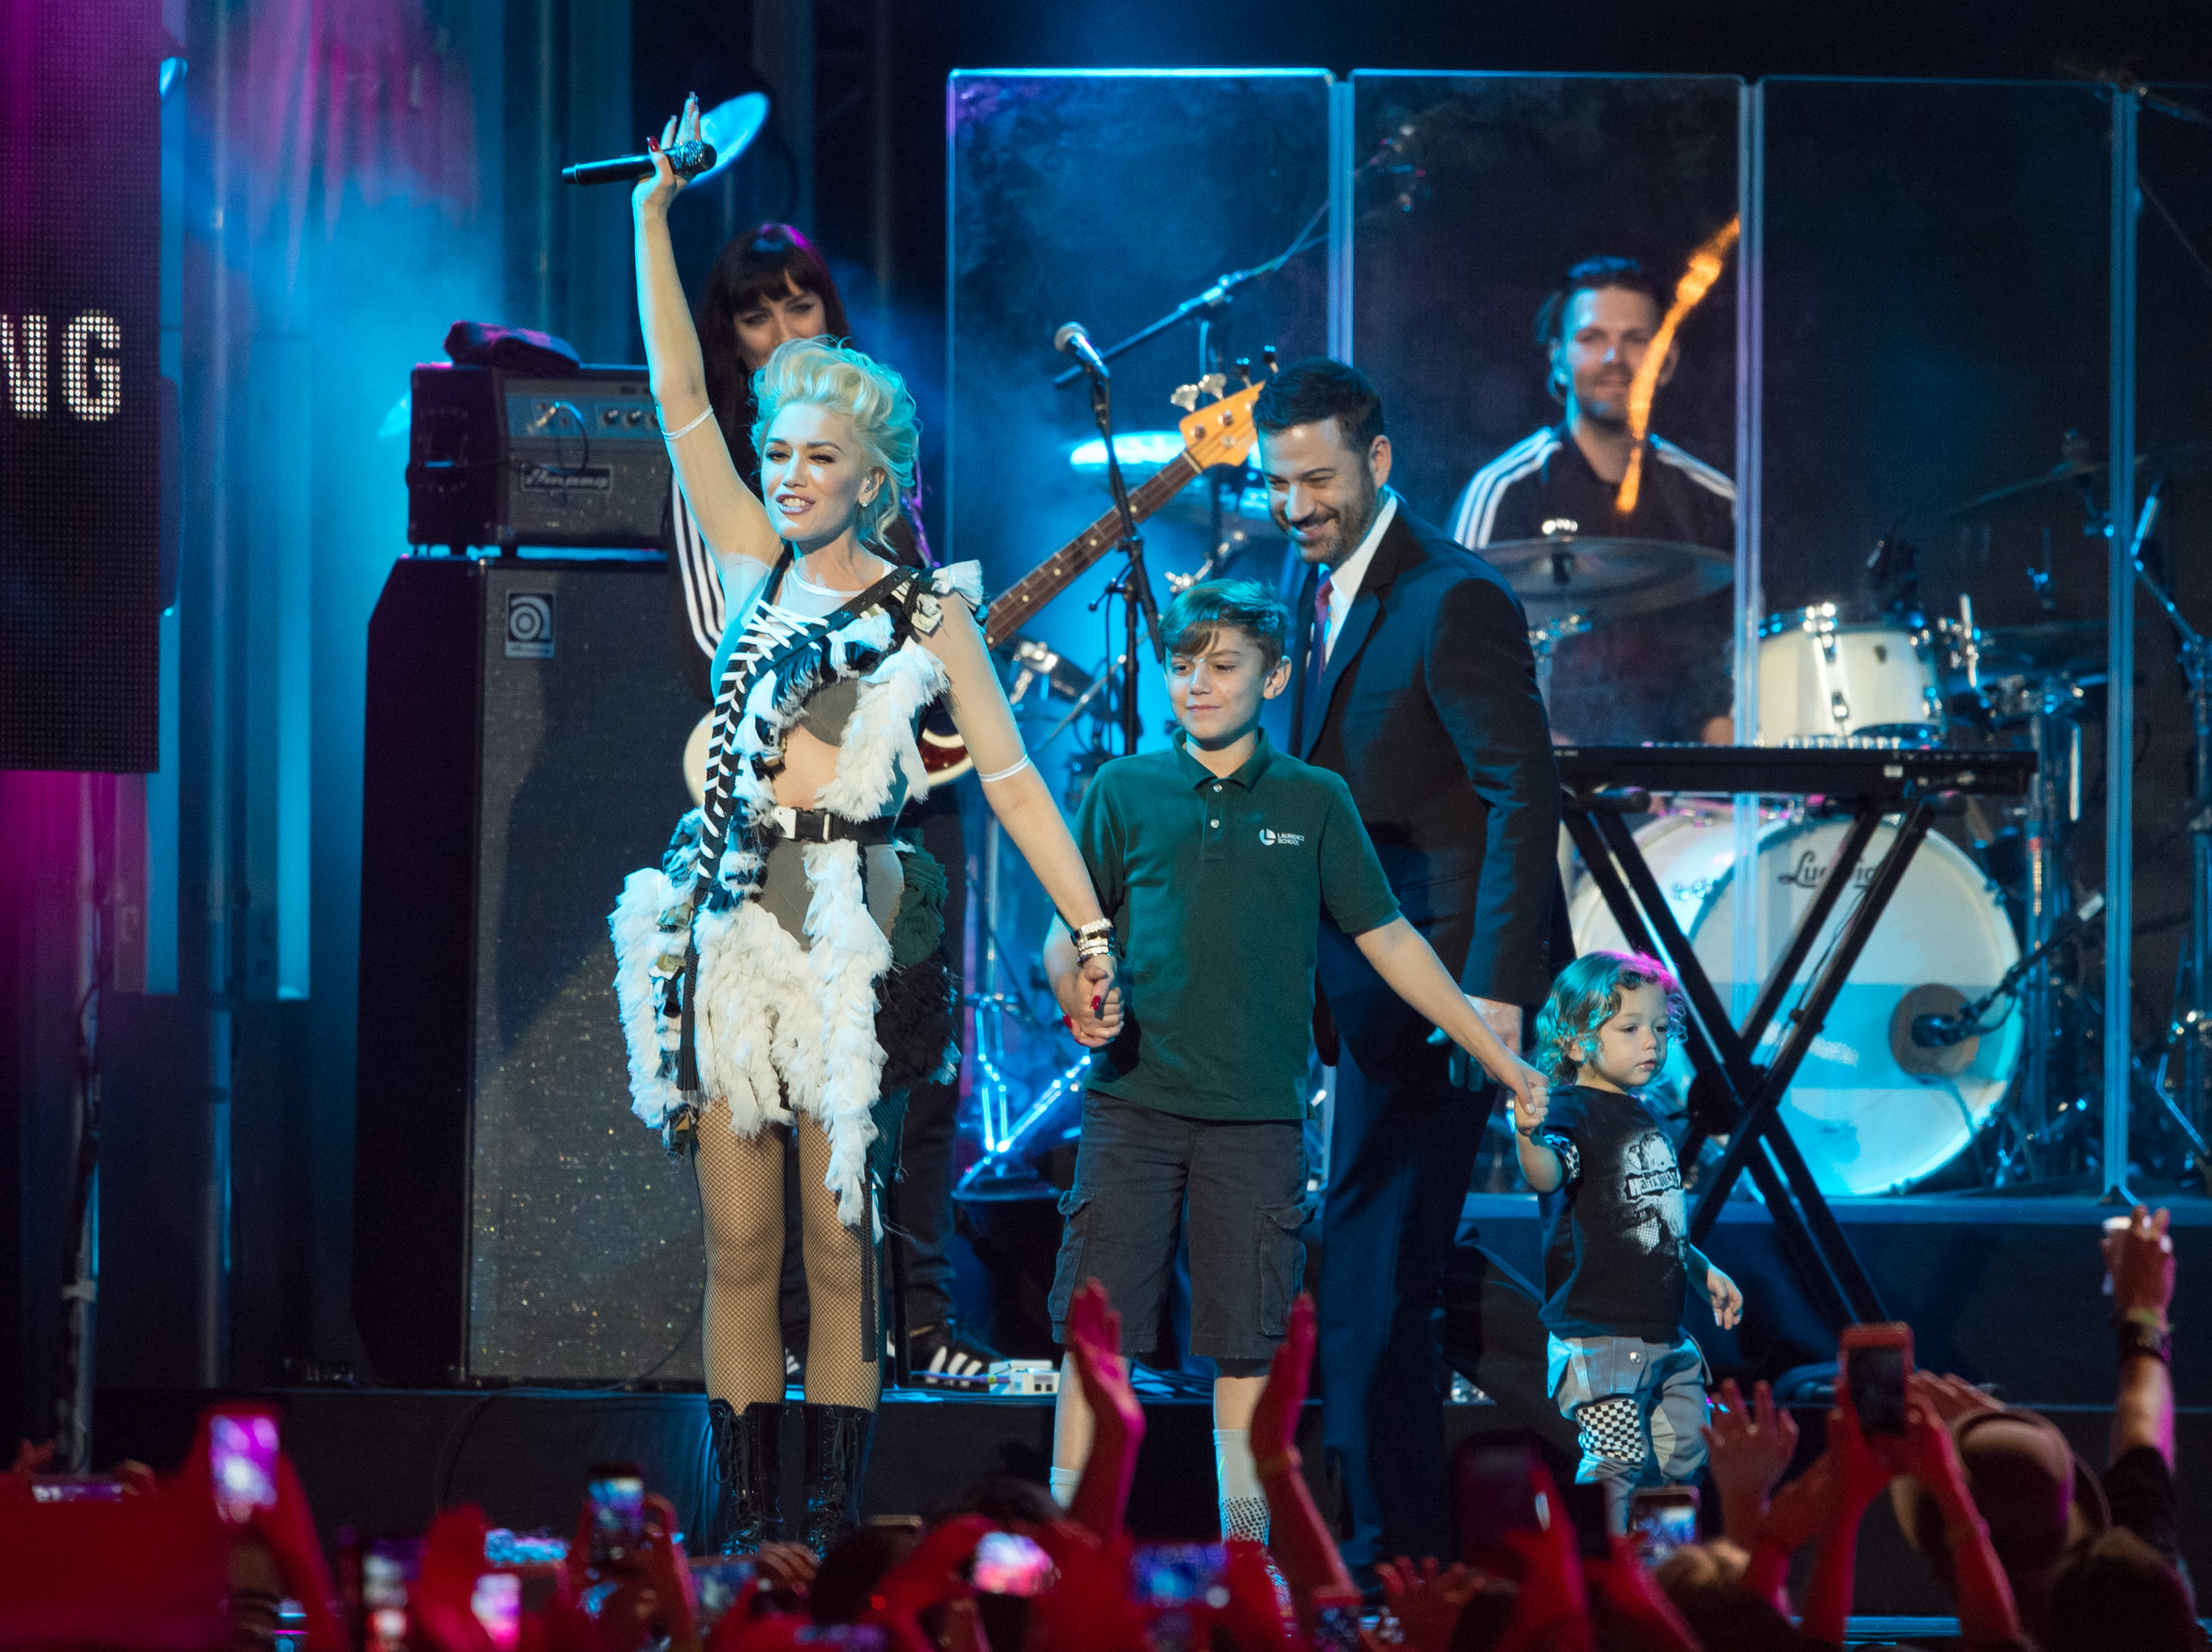 Gwen Stefani, Kingston and Apolo Rossdale with Jimmy Kimmel during Gwen Stefani's performance on "Jimmy Kimmel Live" in Los Angeles, California on February 16, 2016 | Source: Getty Images